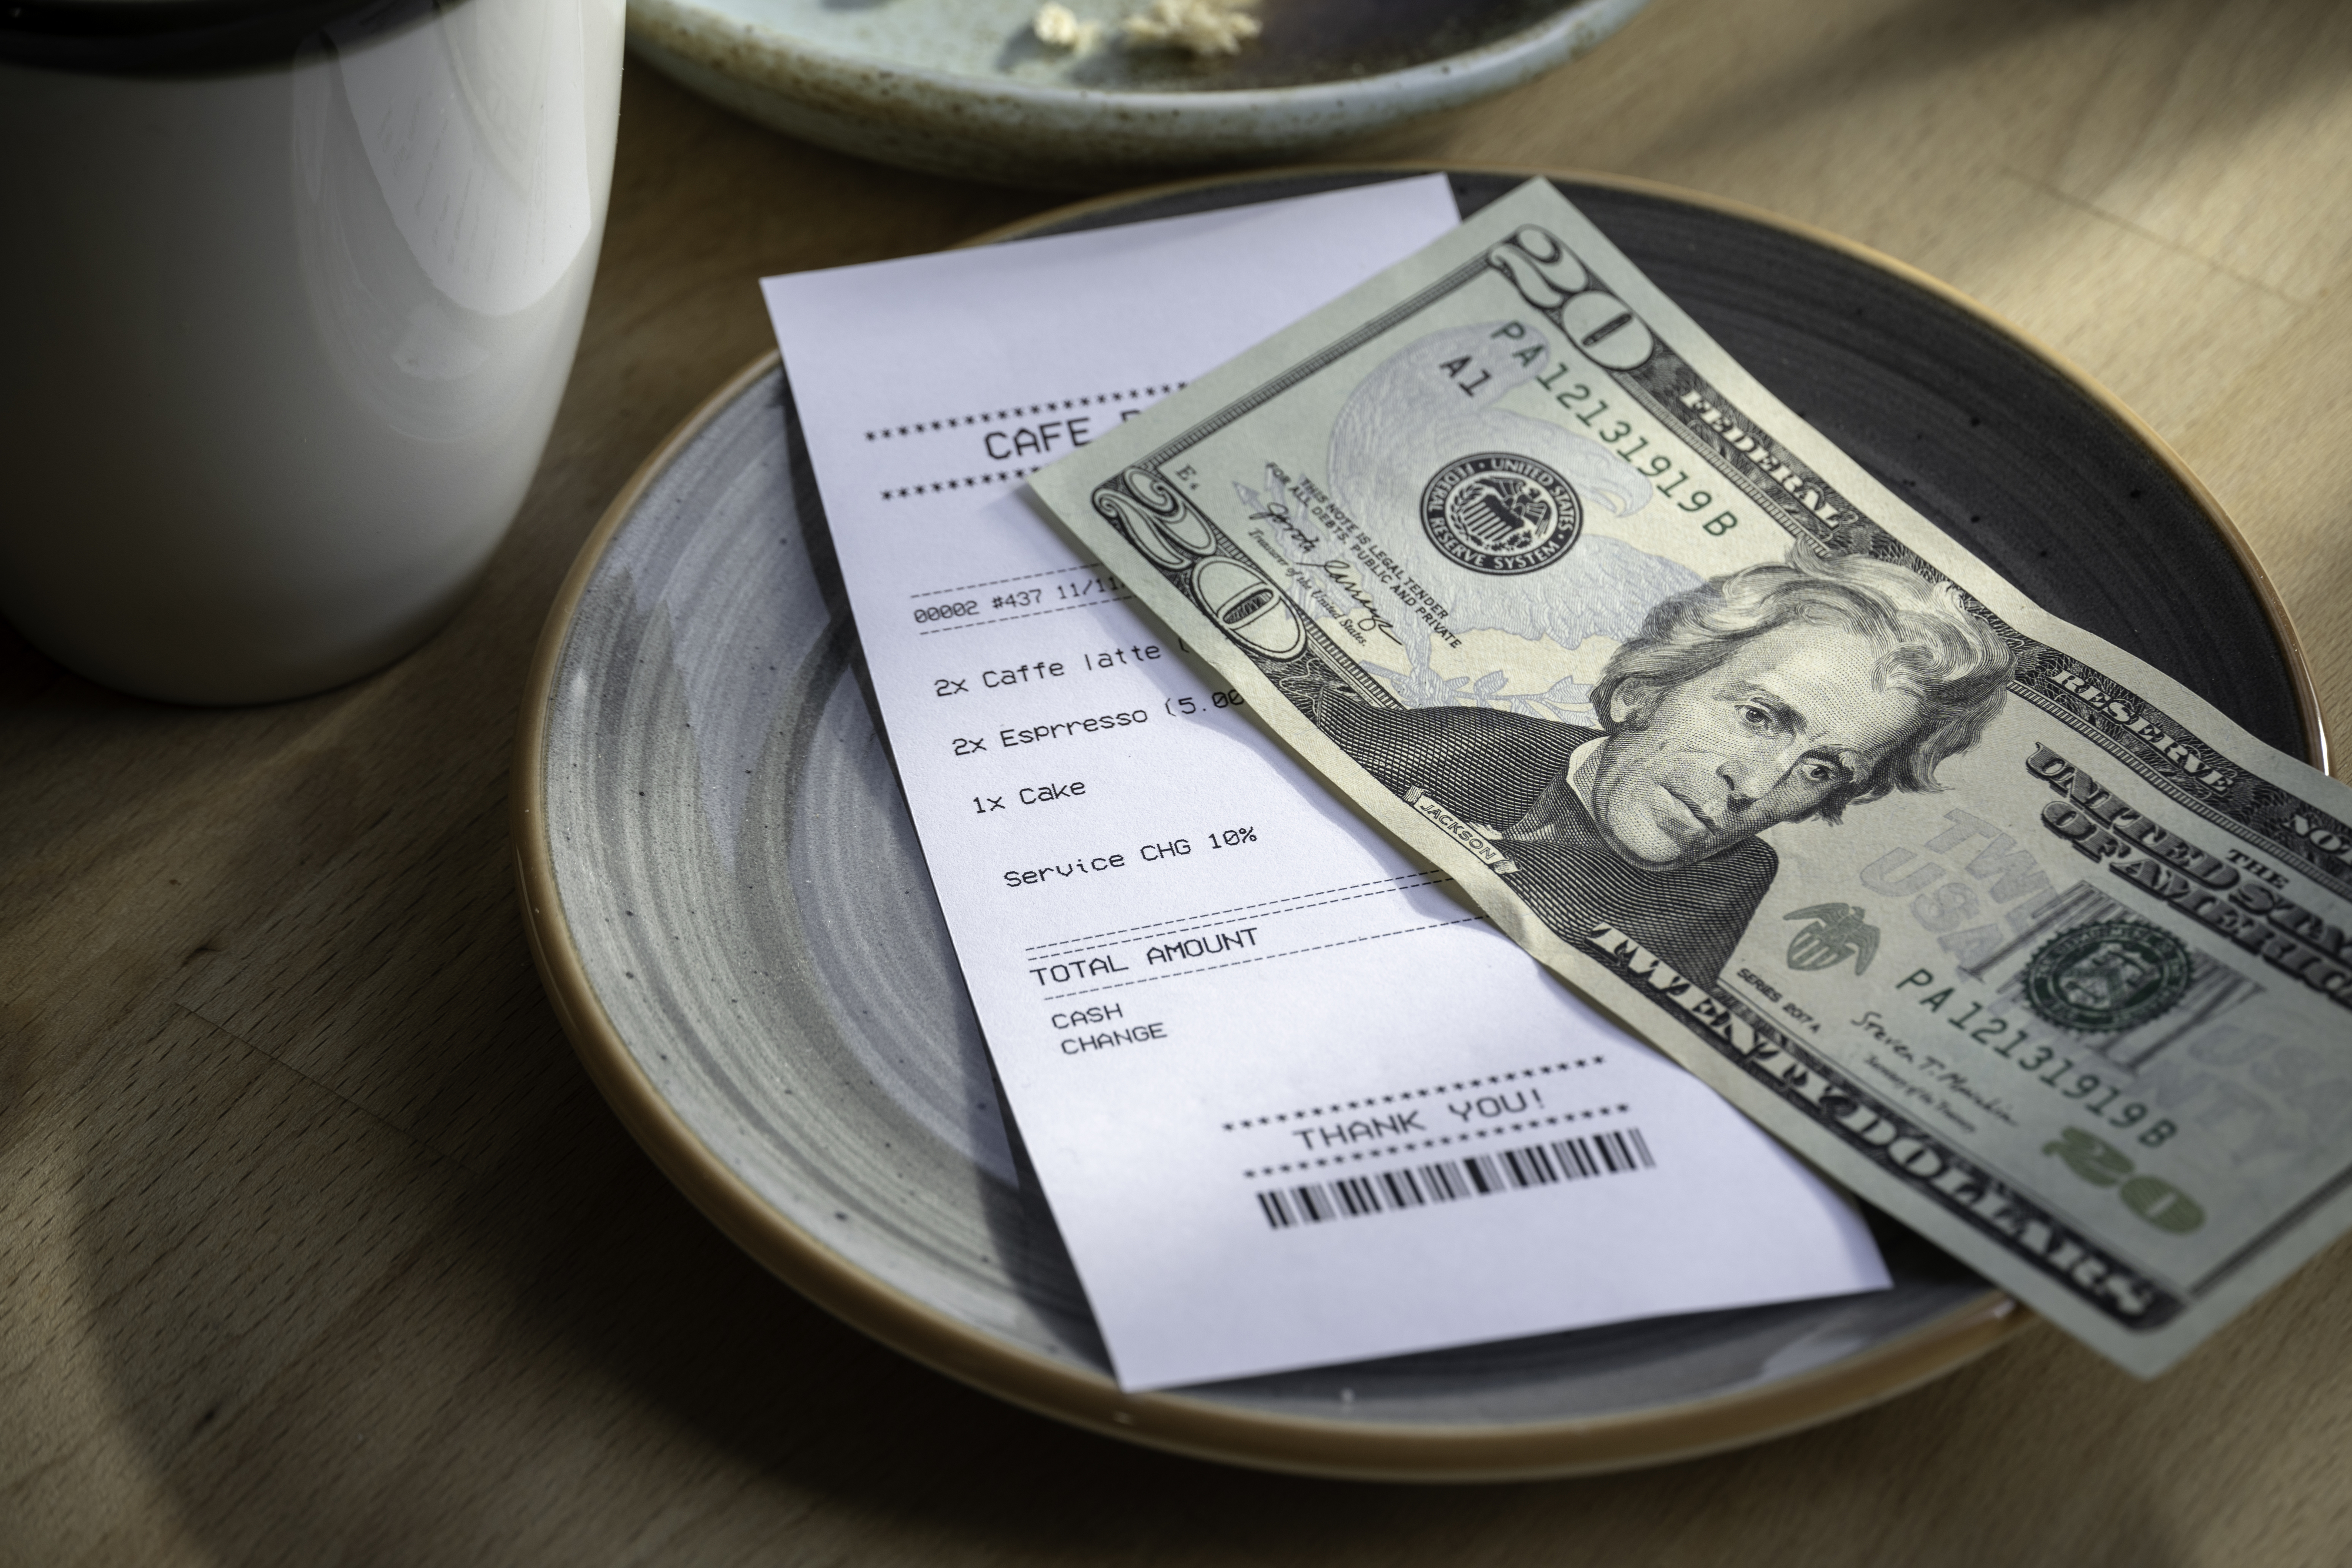 A receipt on a plate with a $20 bill, indicating a payment for a café latte and espresso